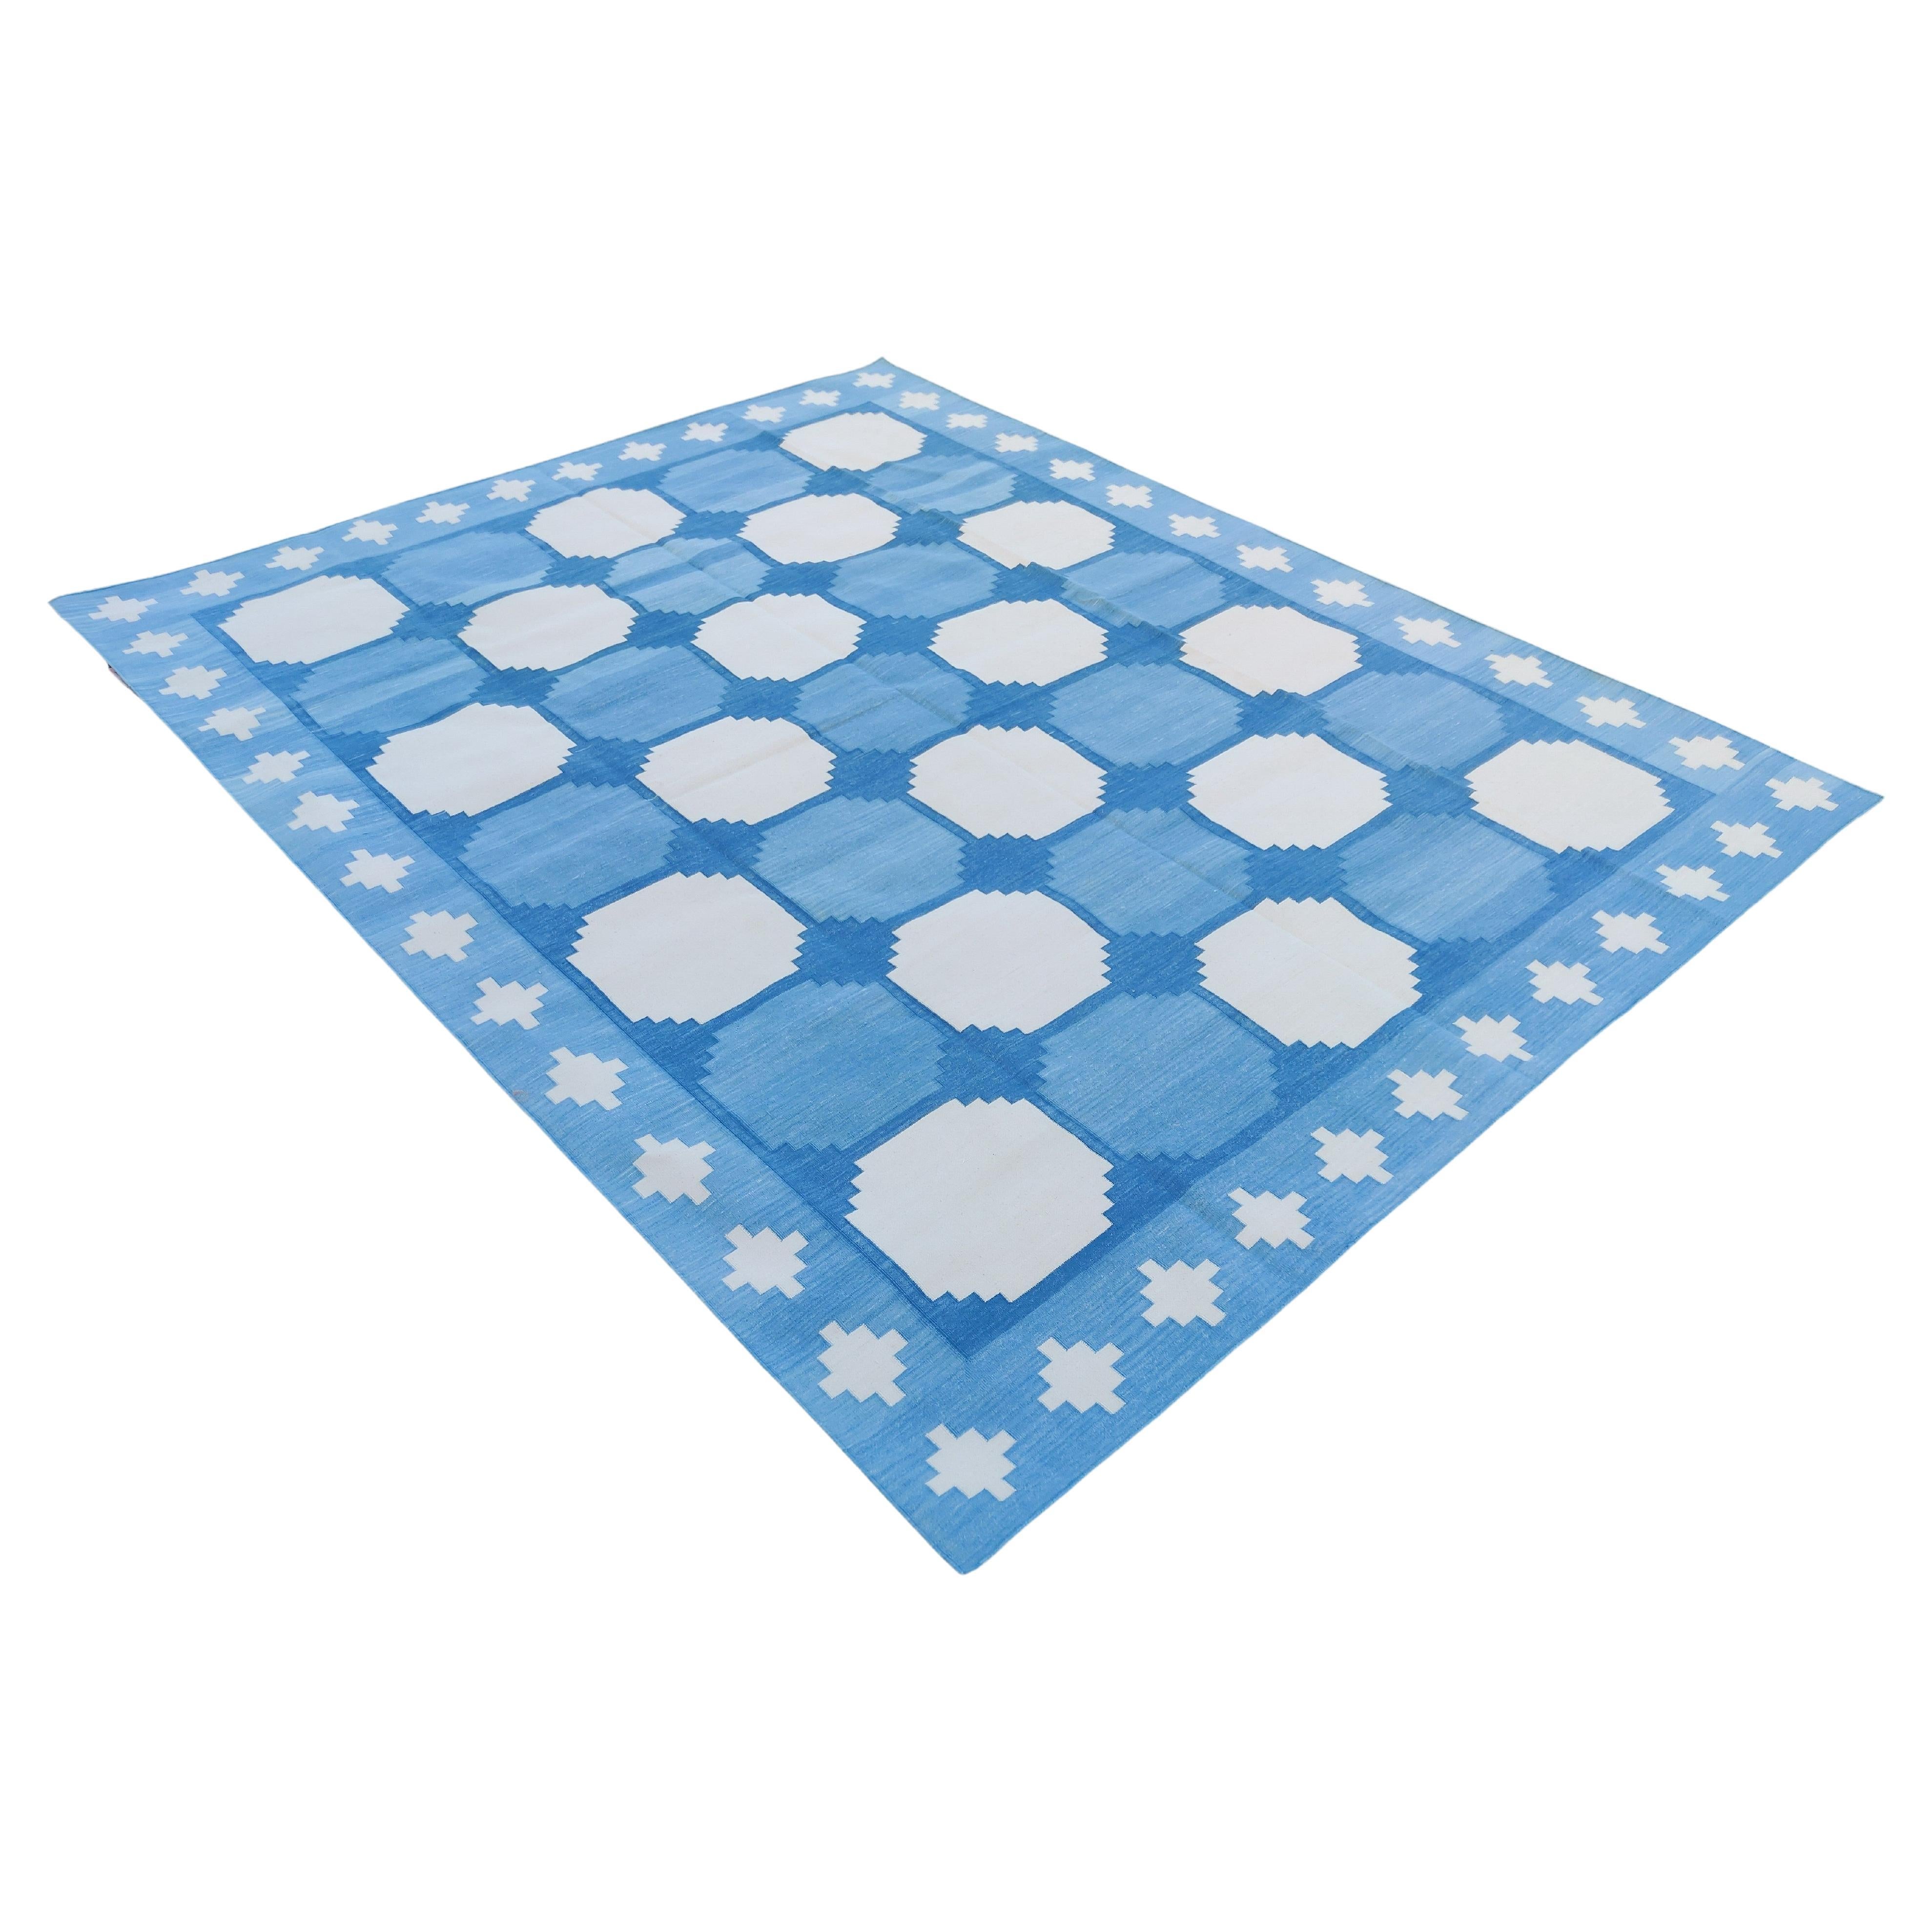 Handmade Cotton Area Flat Weave Rug, 6x9 Blue, White Tile Pattern Indian Dhurrie